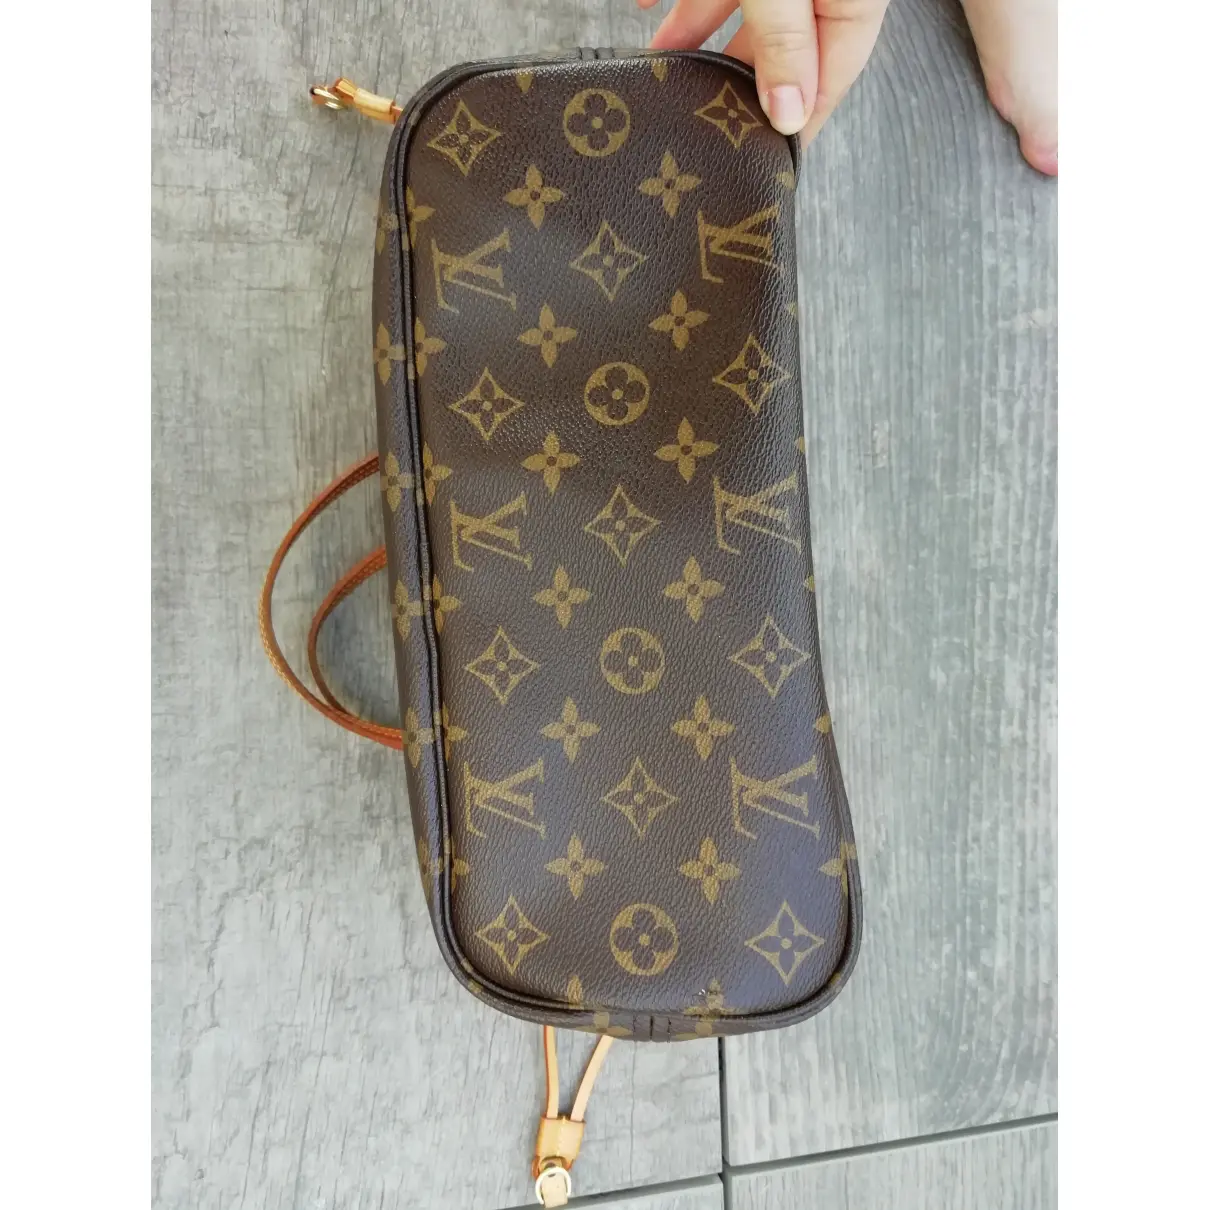 Buy Louis Vuitton Neverfull leather tote online